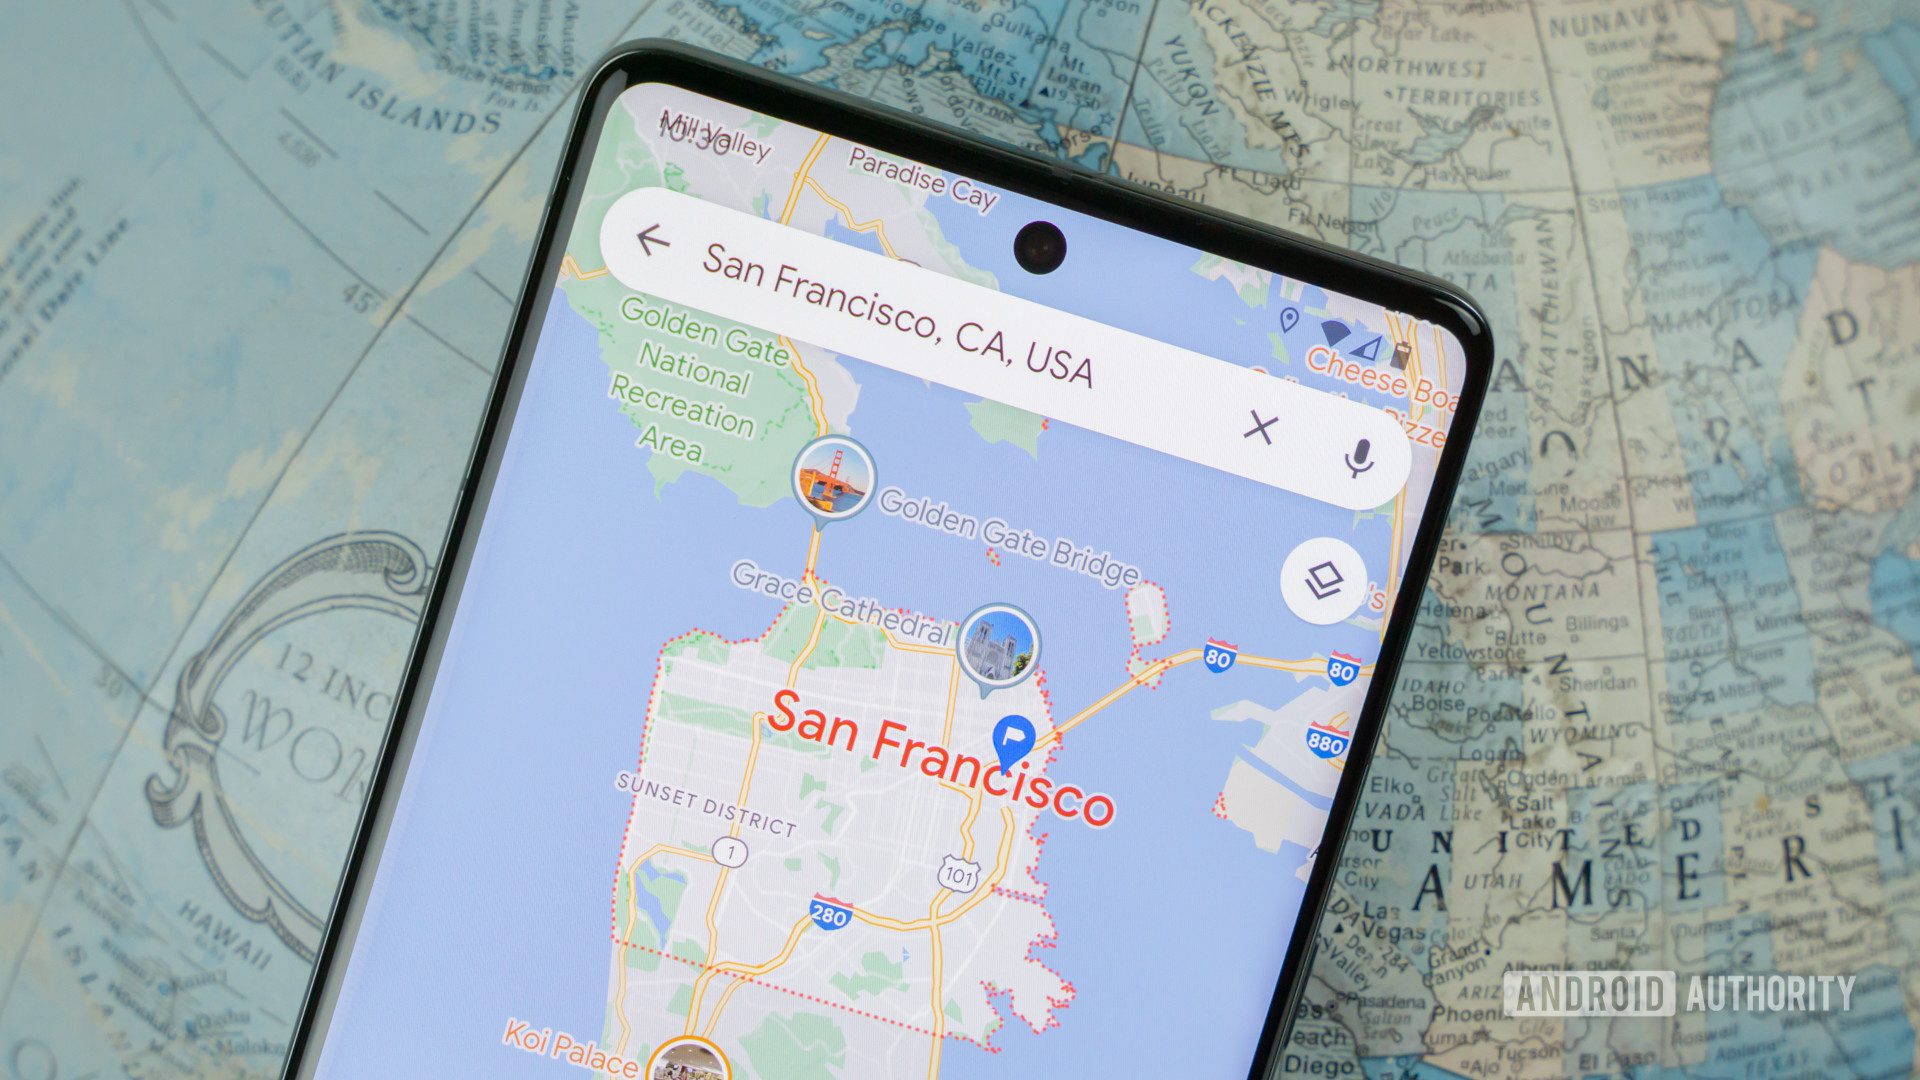 Google Maps gets “visible directions while navigating” for Android and iOS